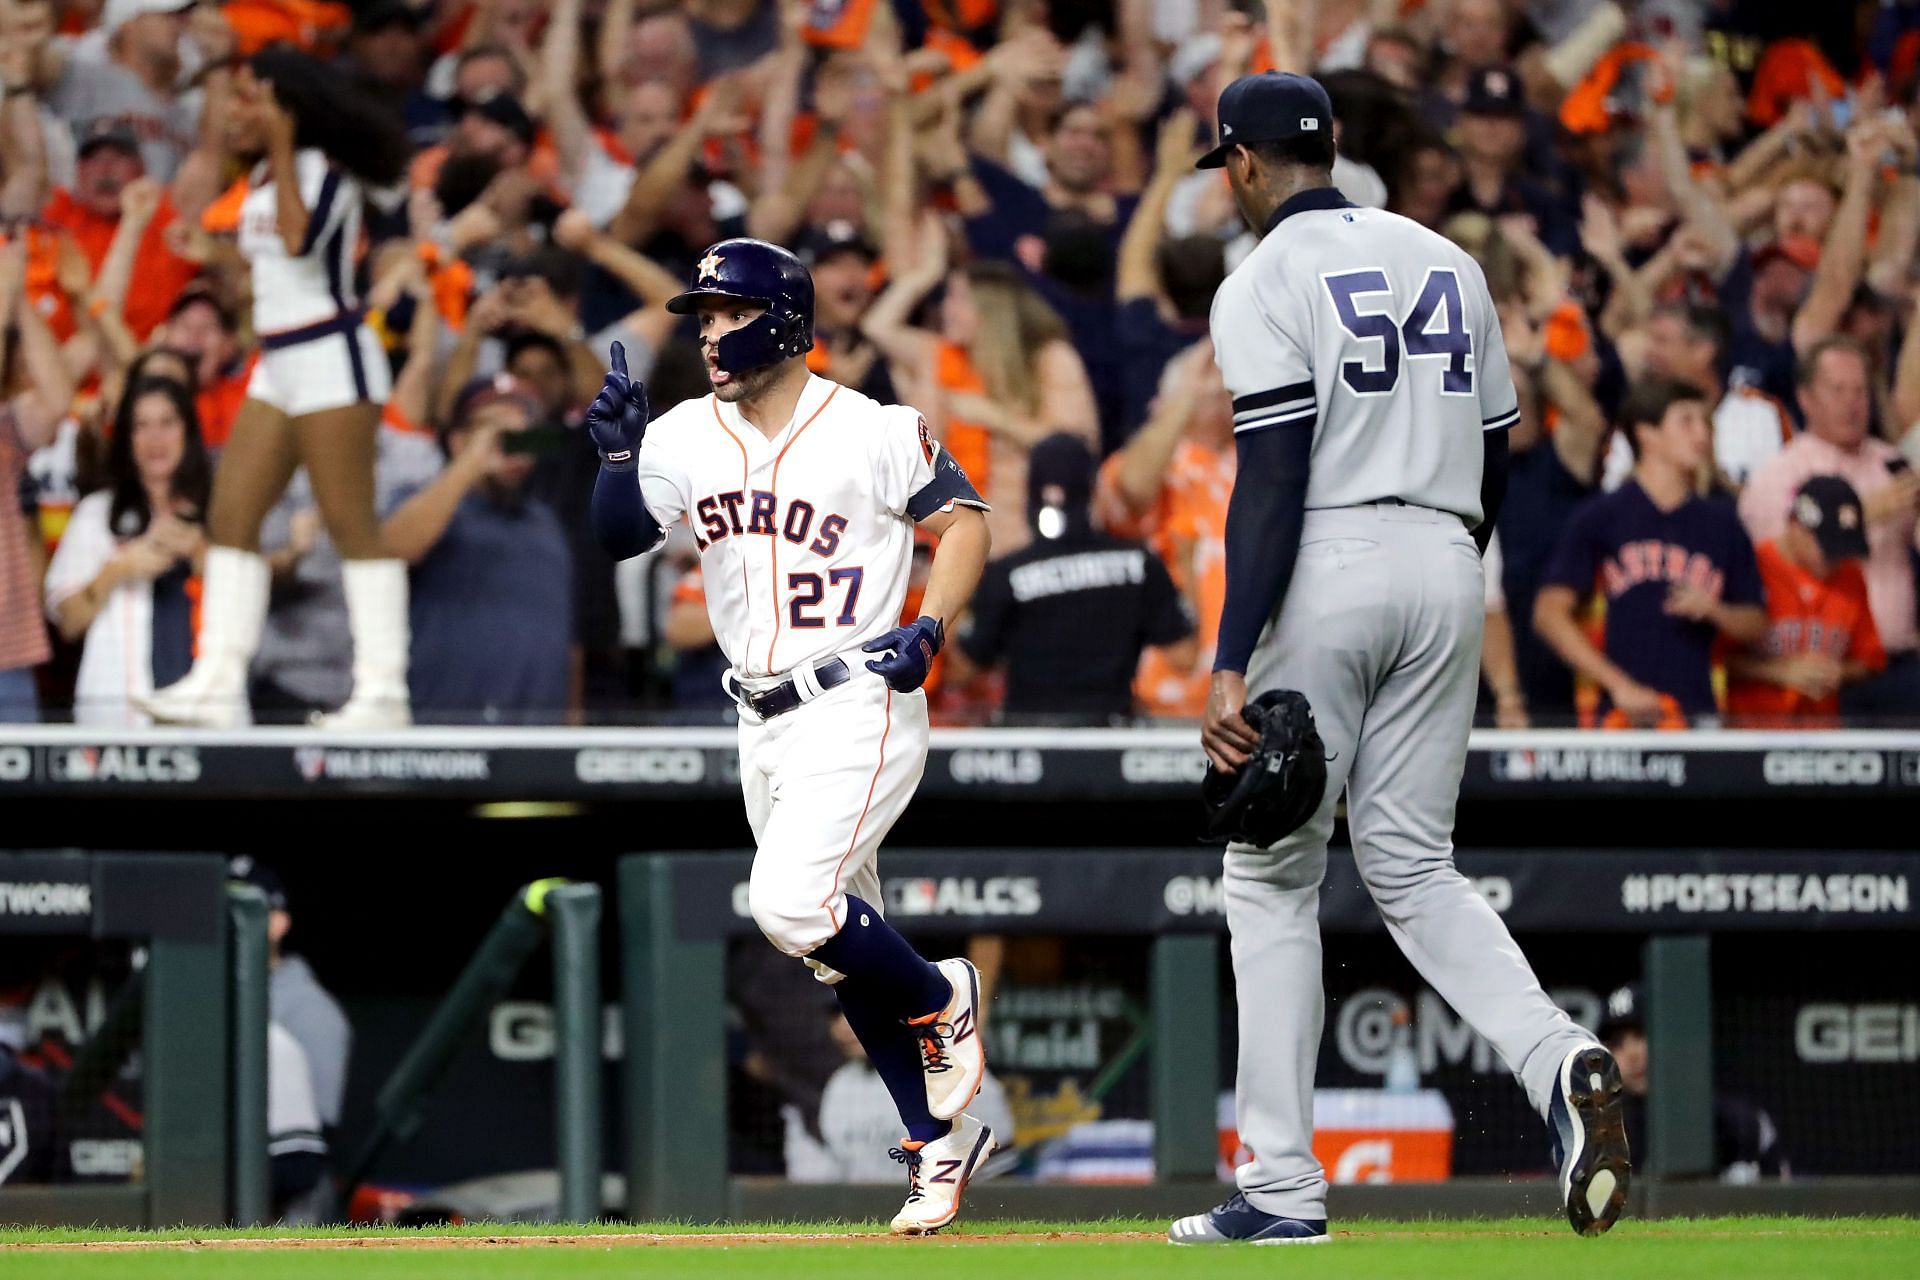 Jose Altuve #27 of the Houston Astros comes home to score following his ninth inning walk-off two-run home run as Aroldis Chapman #54 of the New York Yankees walks off the field in 2017